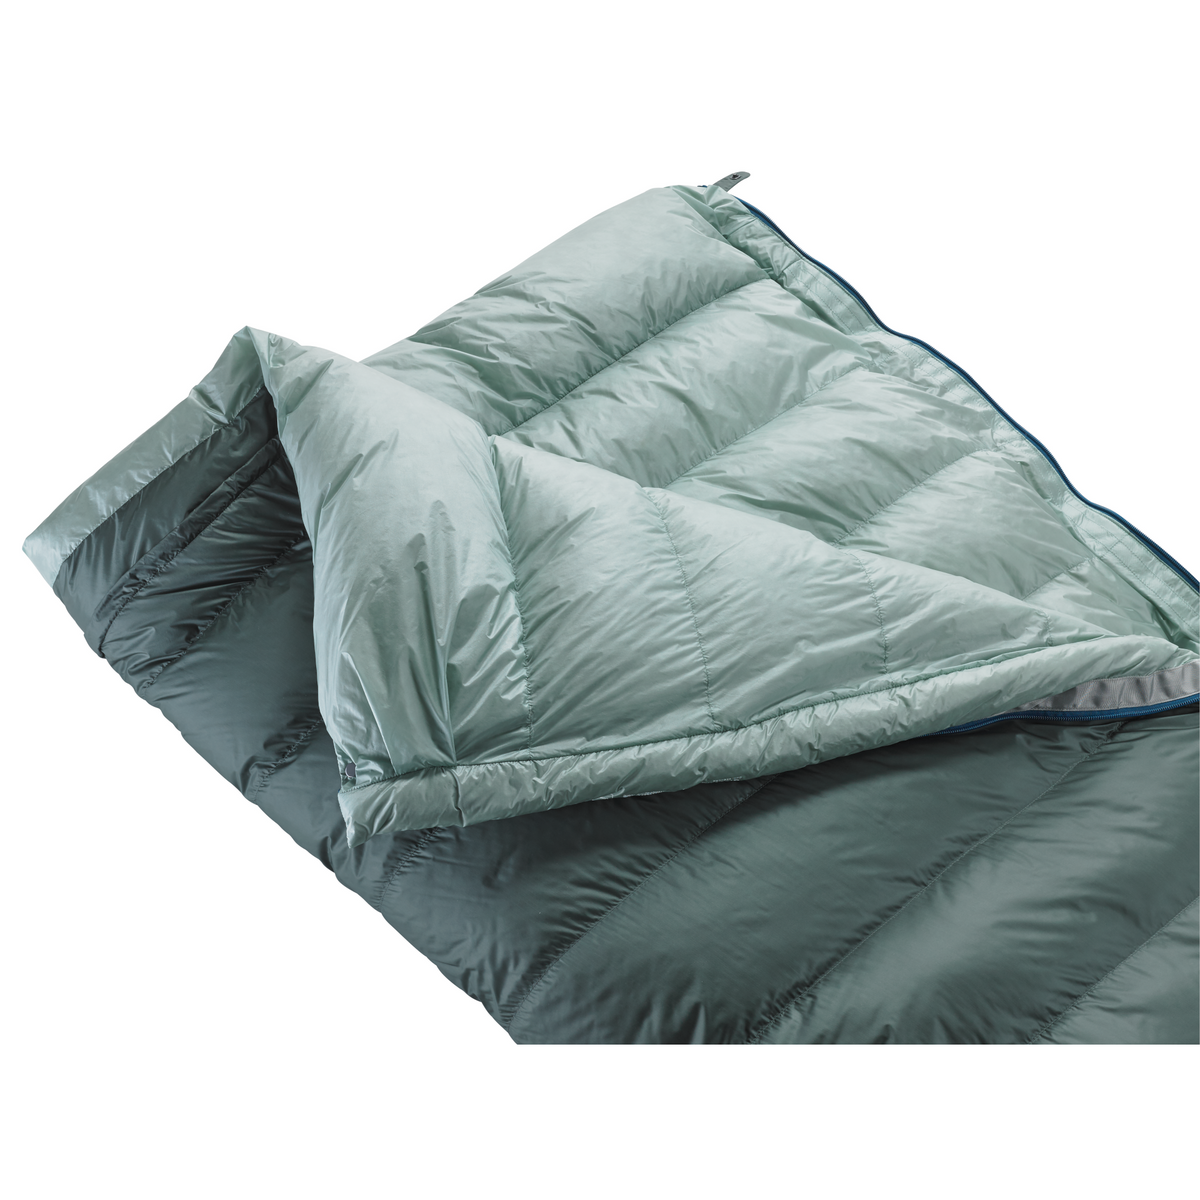 Thermarest Ohm 20F/-6C sleeping bag in Balsam colour, showing inside of bag